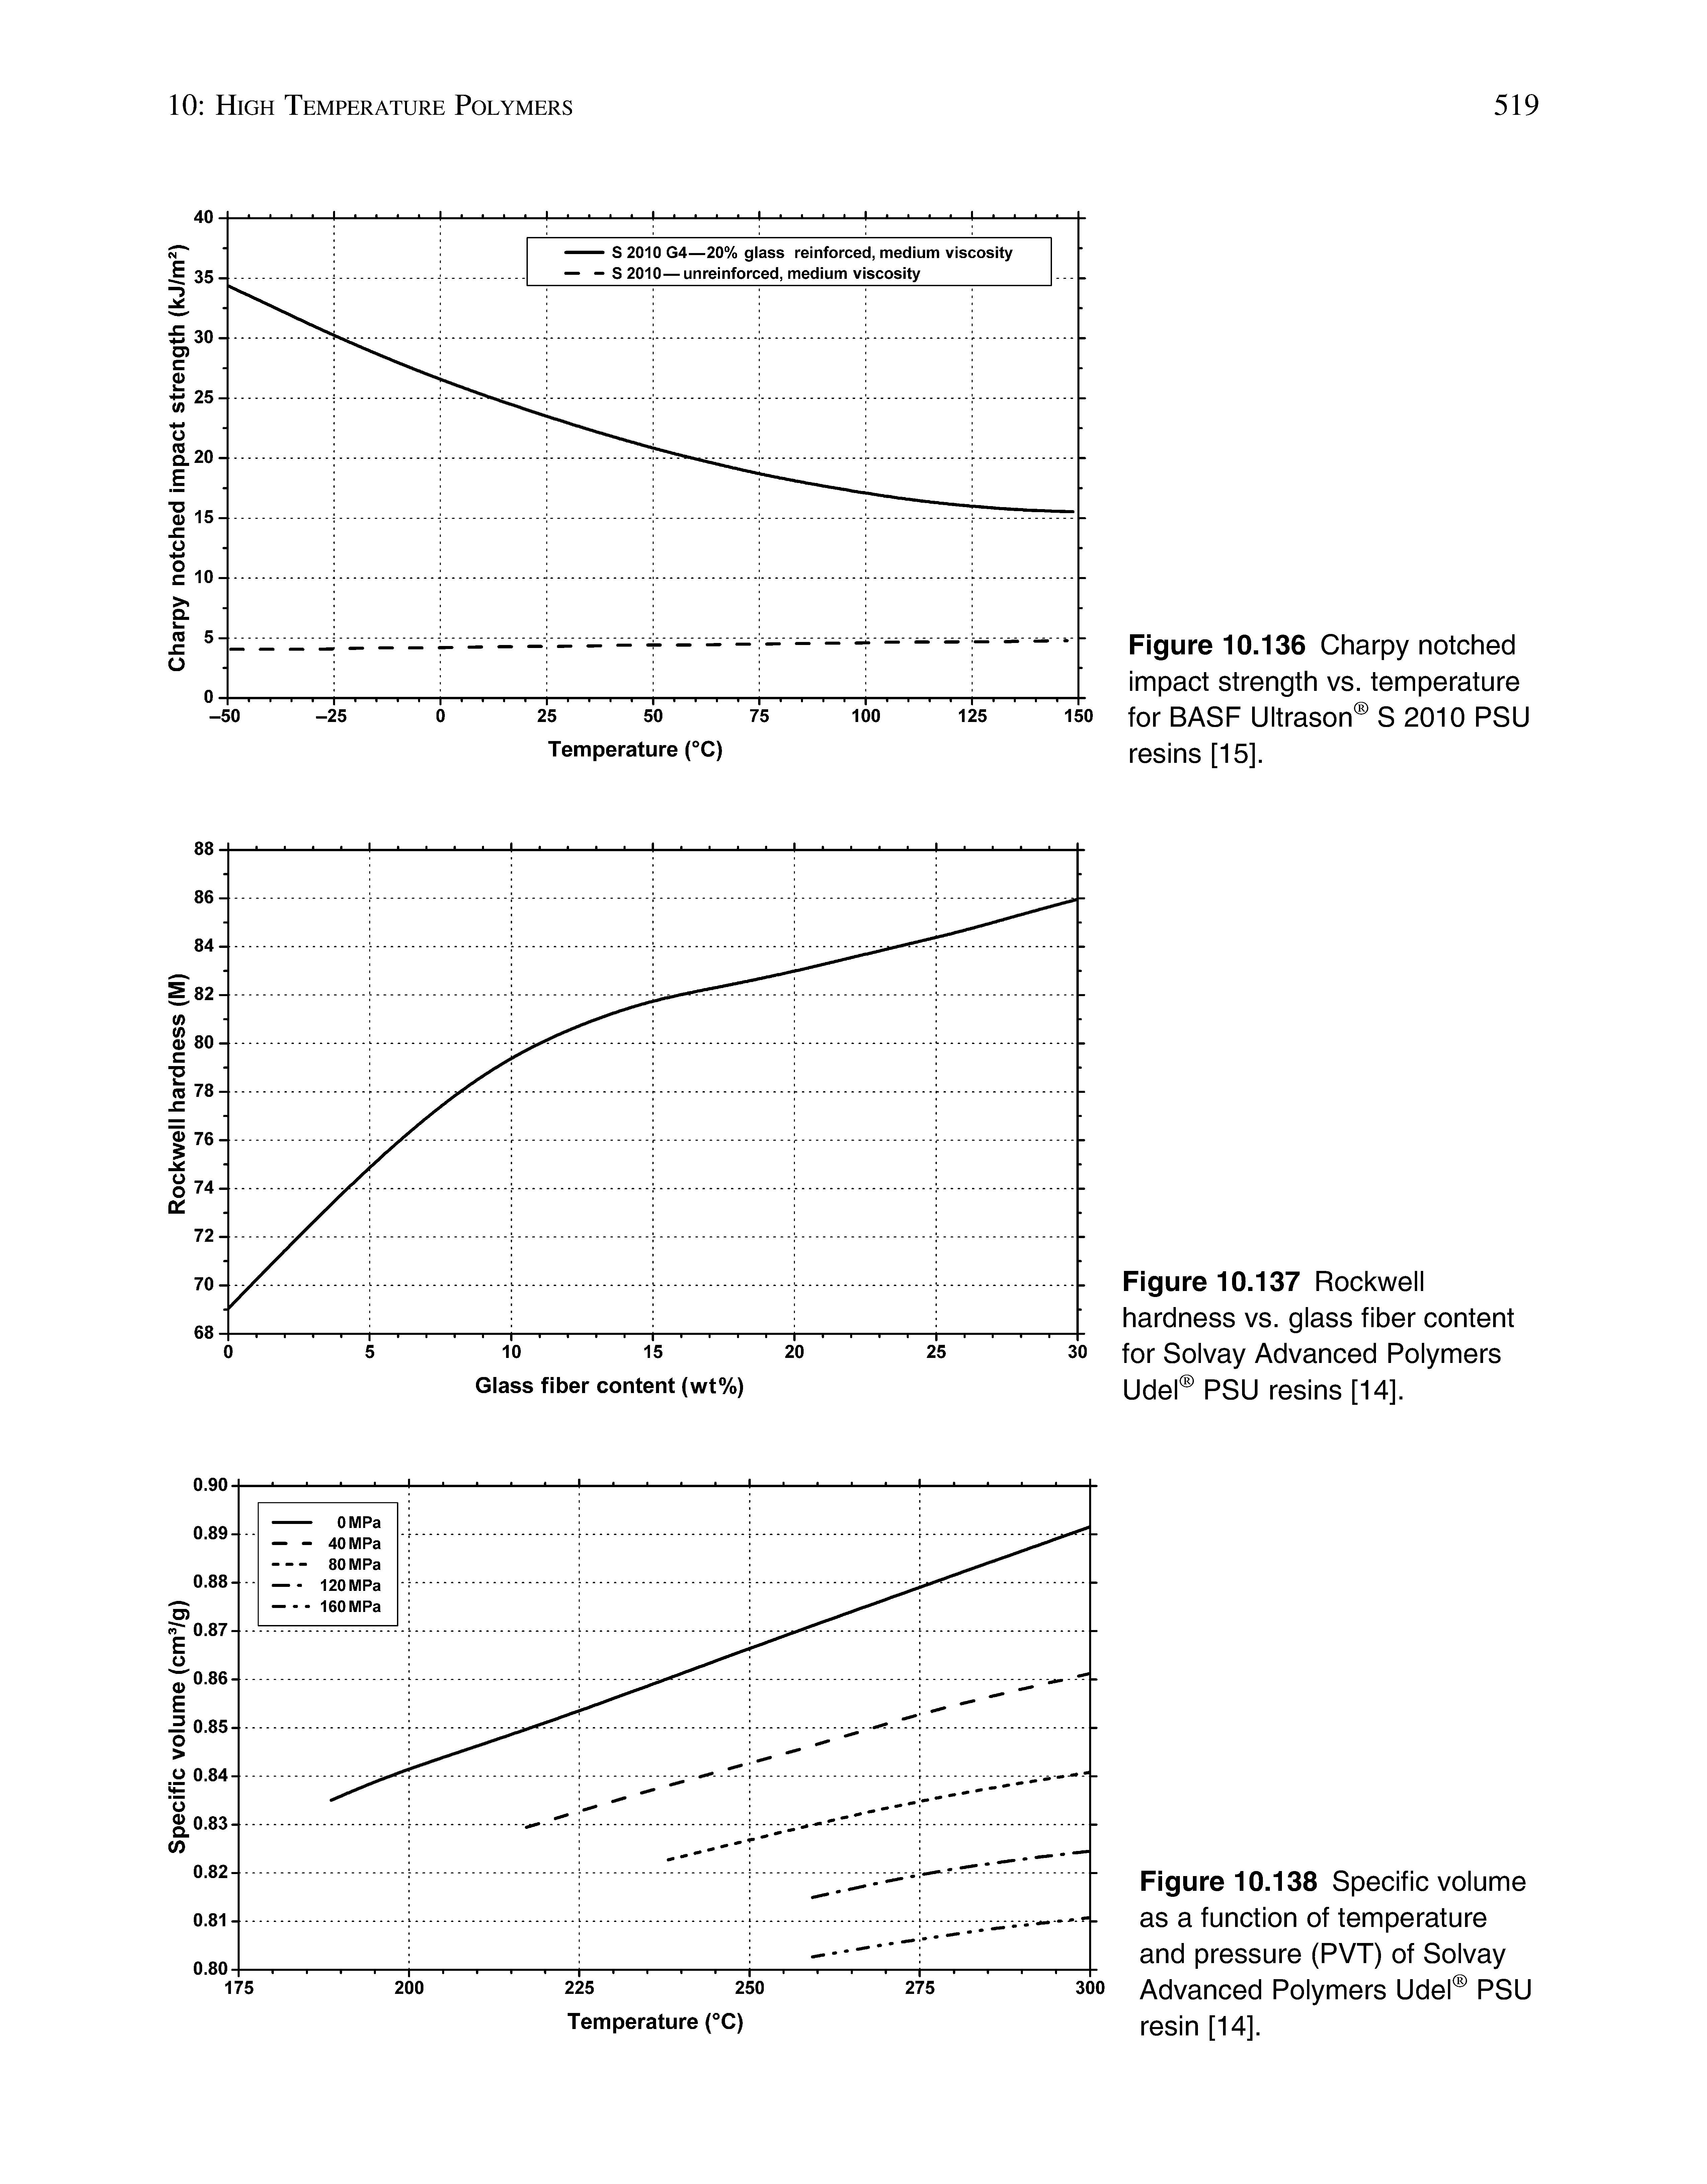 Figure 10.138 Specific volume as a function of temperature and pressure (PVT) of Solvay Advanced Polymers Udel PSU resin [14].